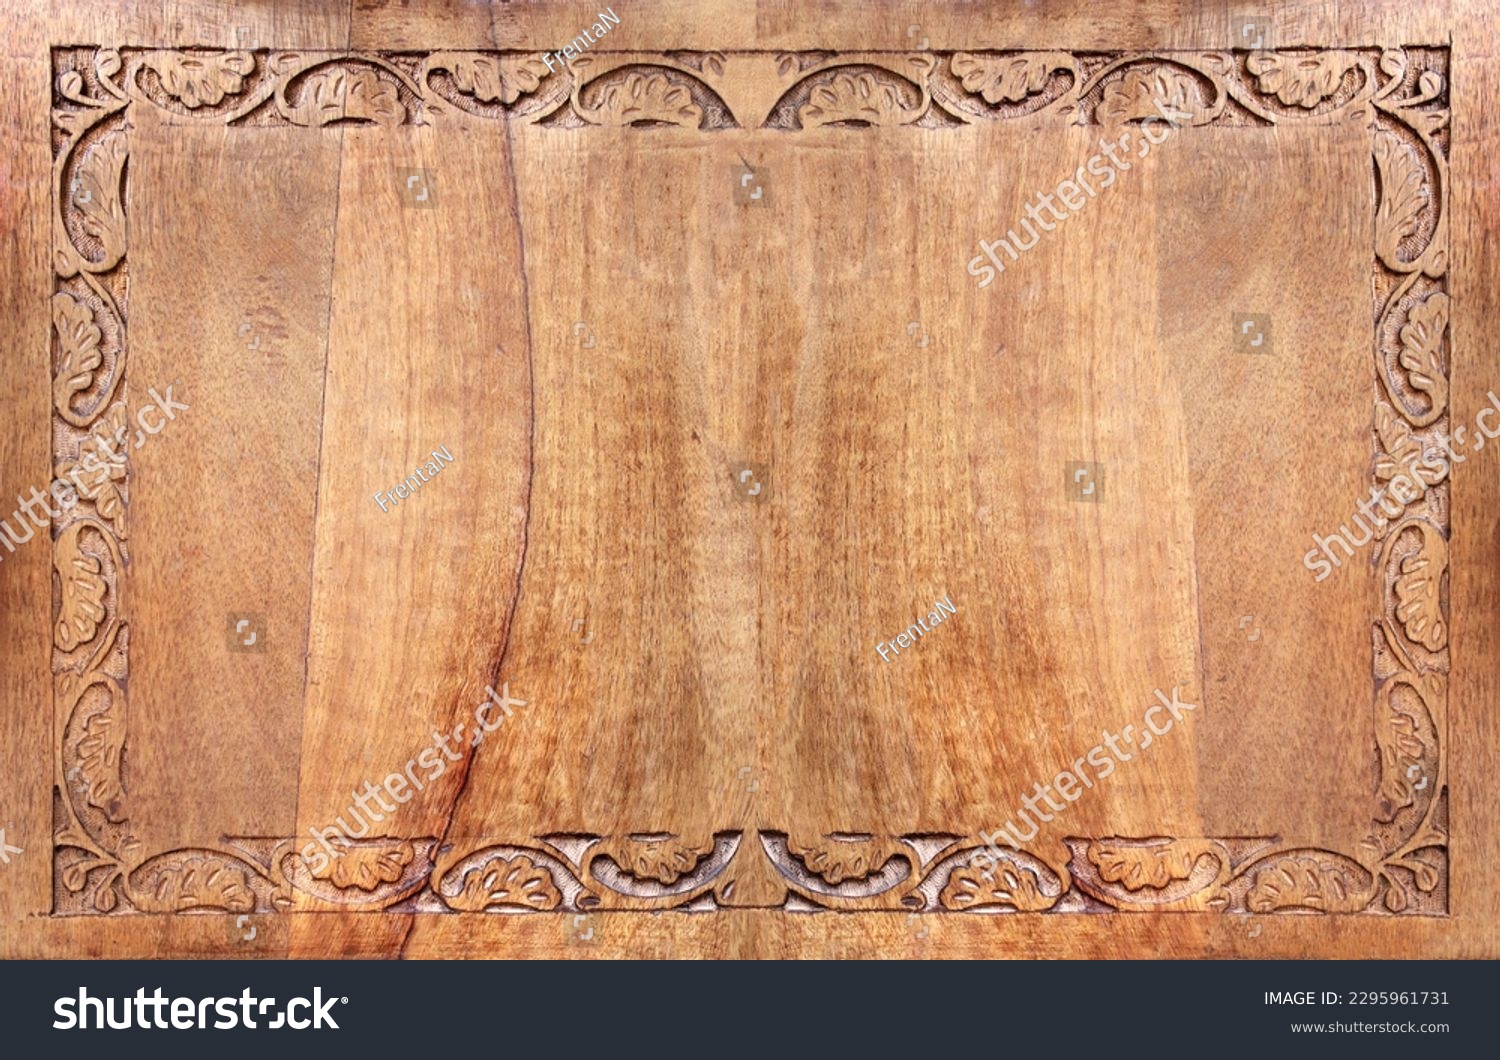 Horizontal background with wood carving floral ornament. Decorative carved border on wooden surface. Mock up template. Copy space for text #2295961731